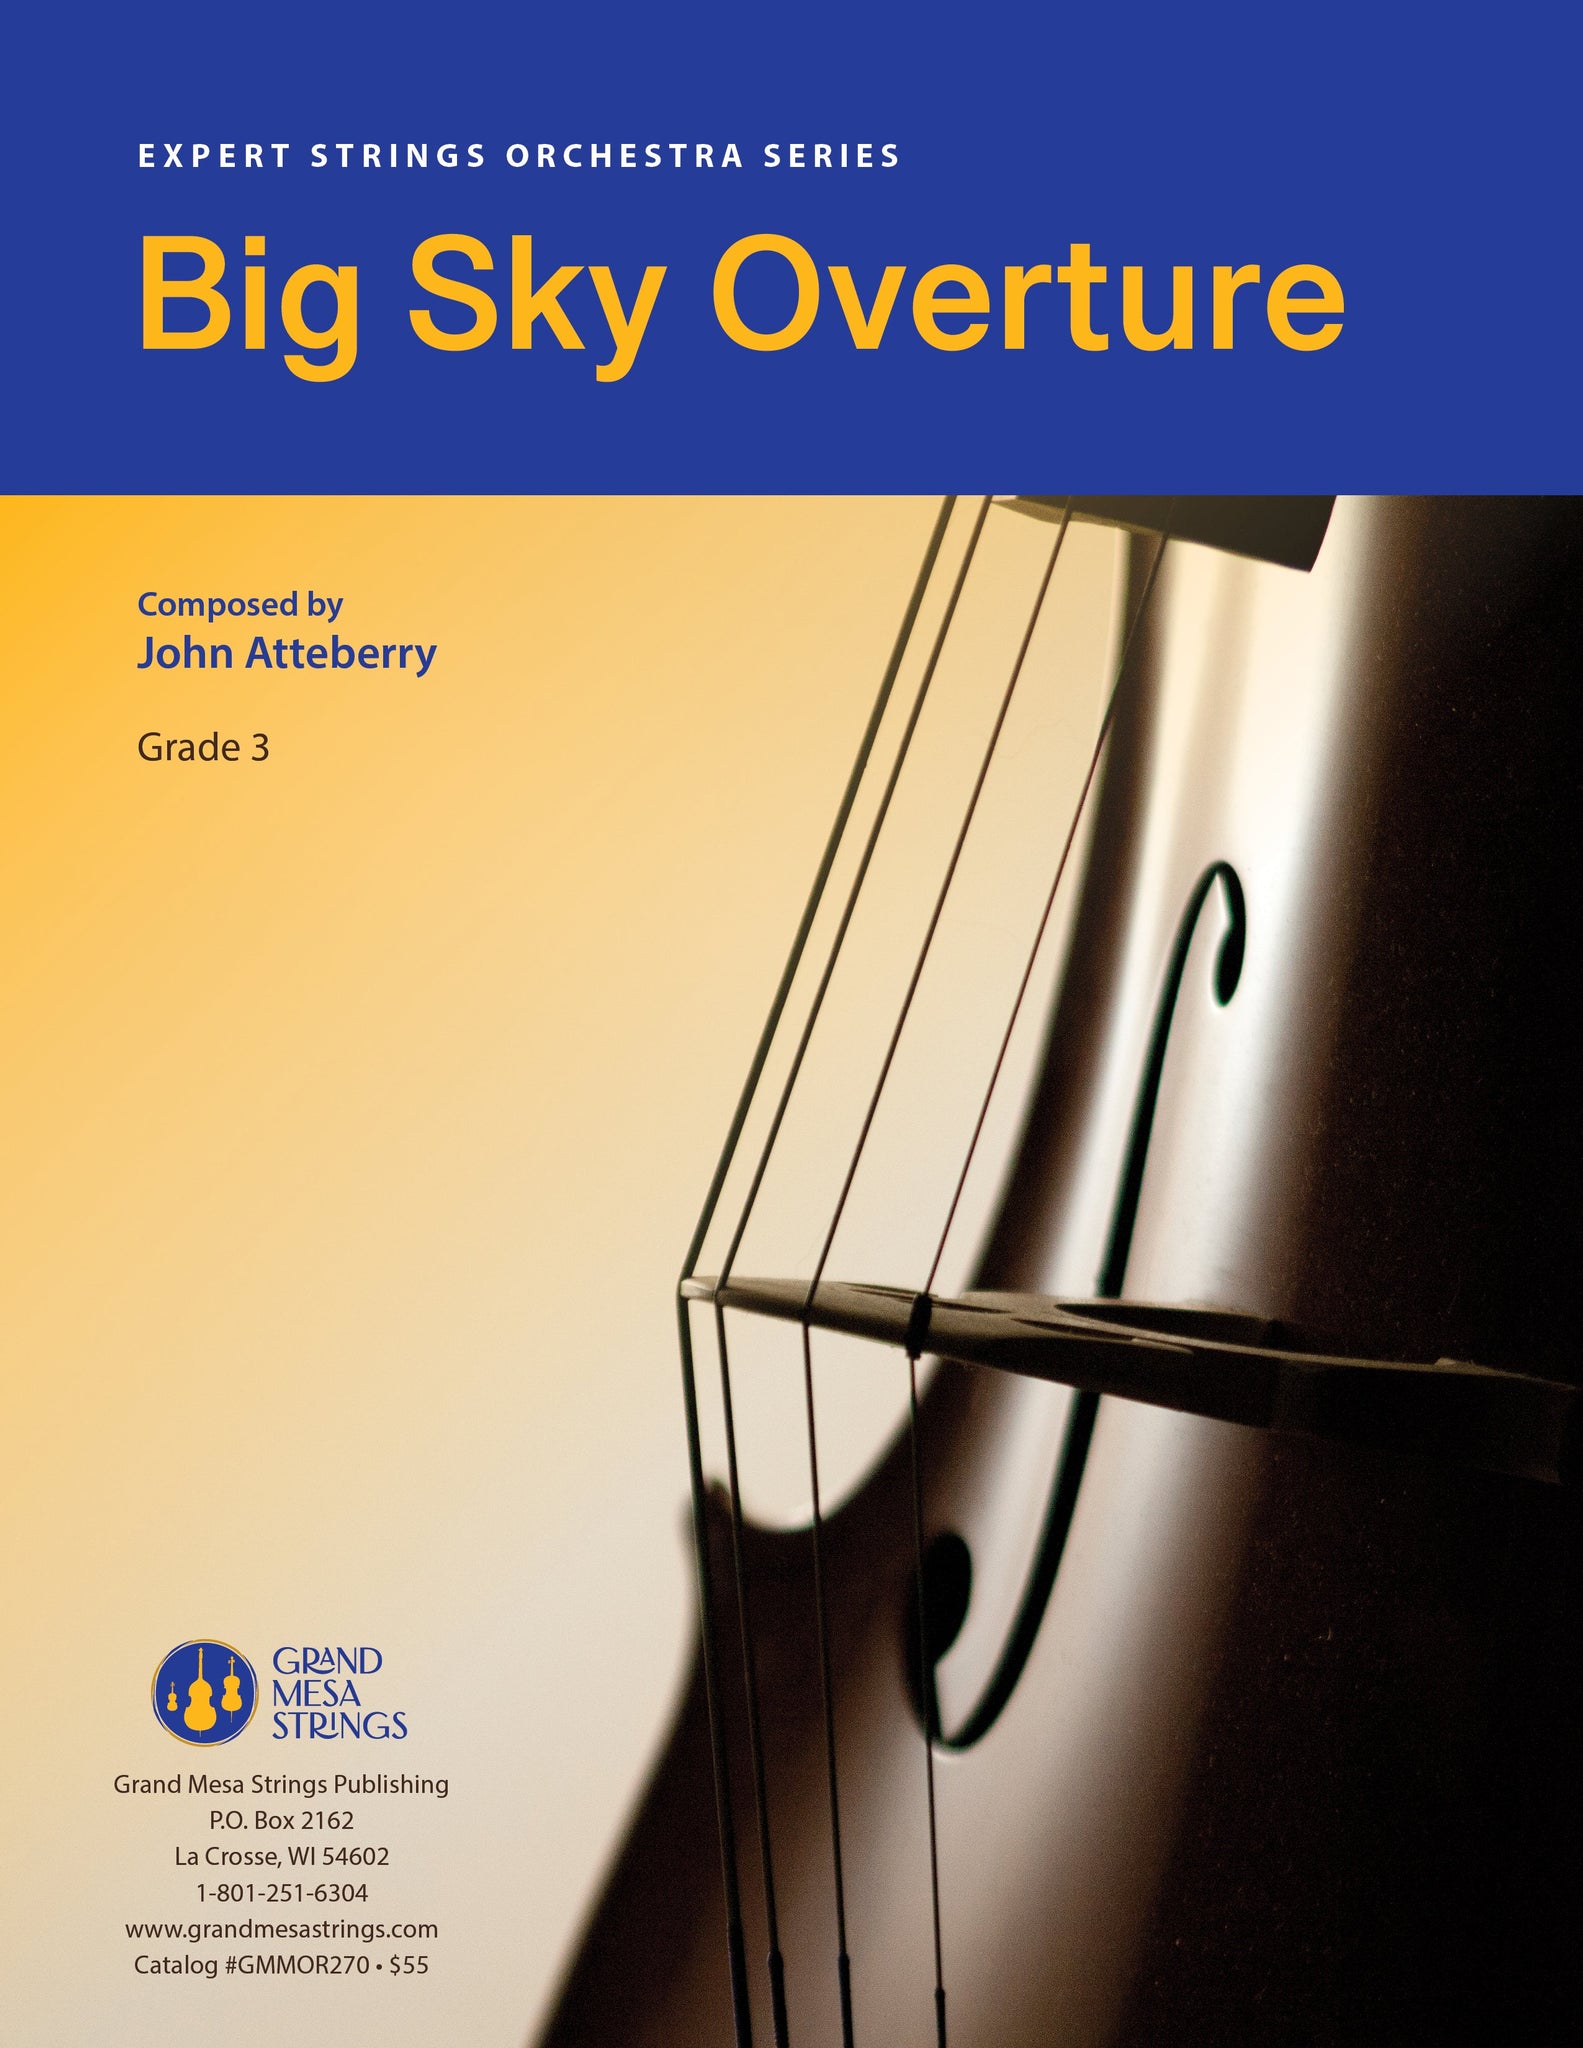 Strings sheet music cover of Big Sky Overture, composed by John Atteberry.